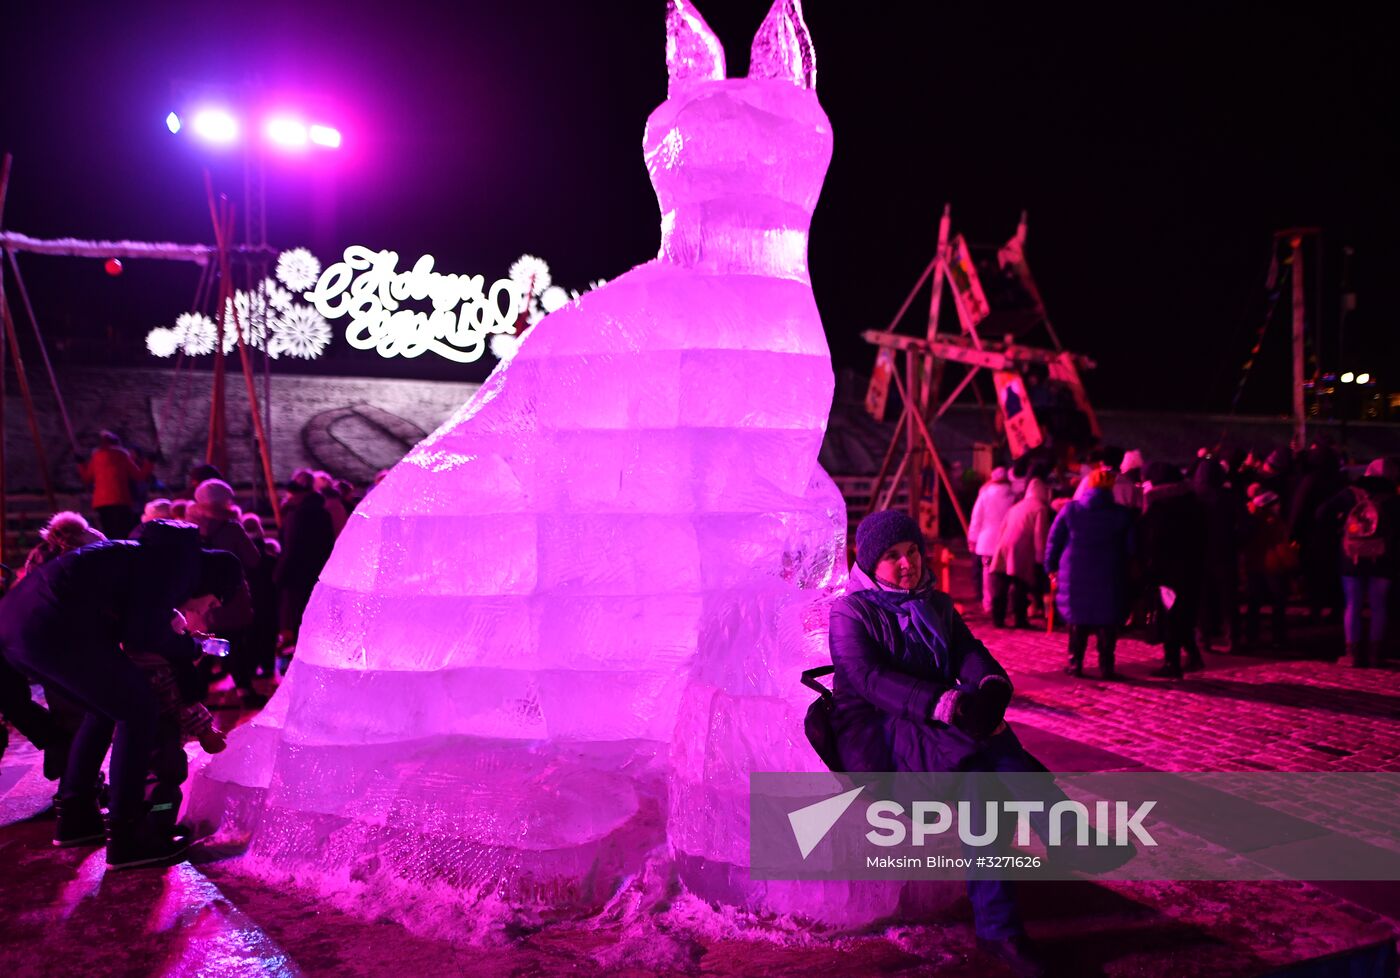 Ice Moscow Festival